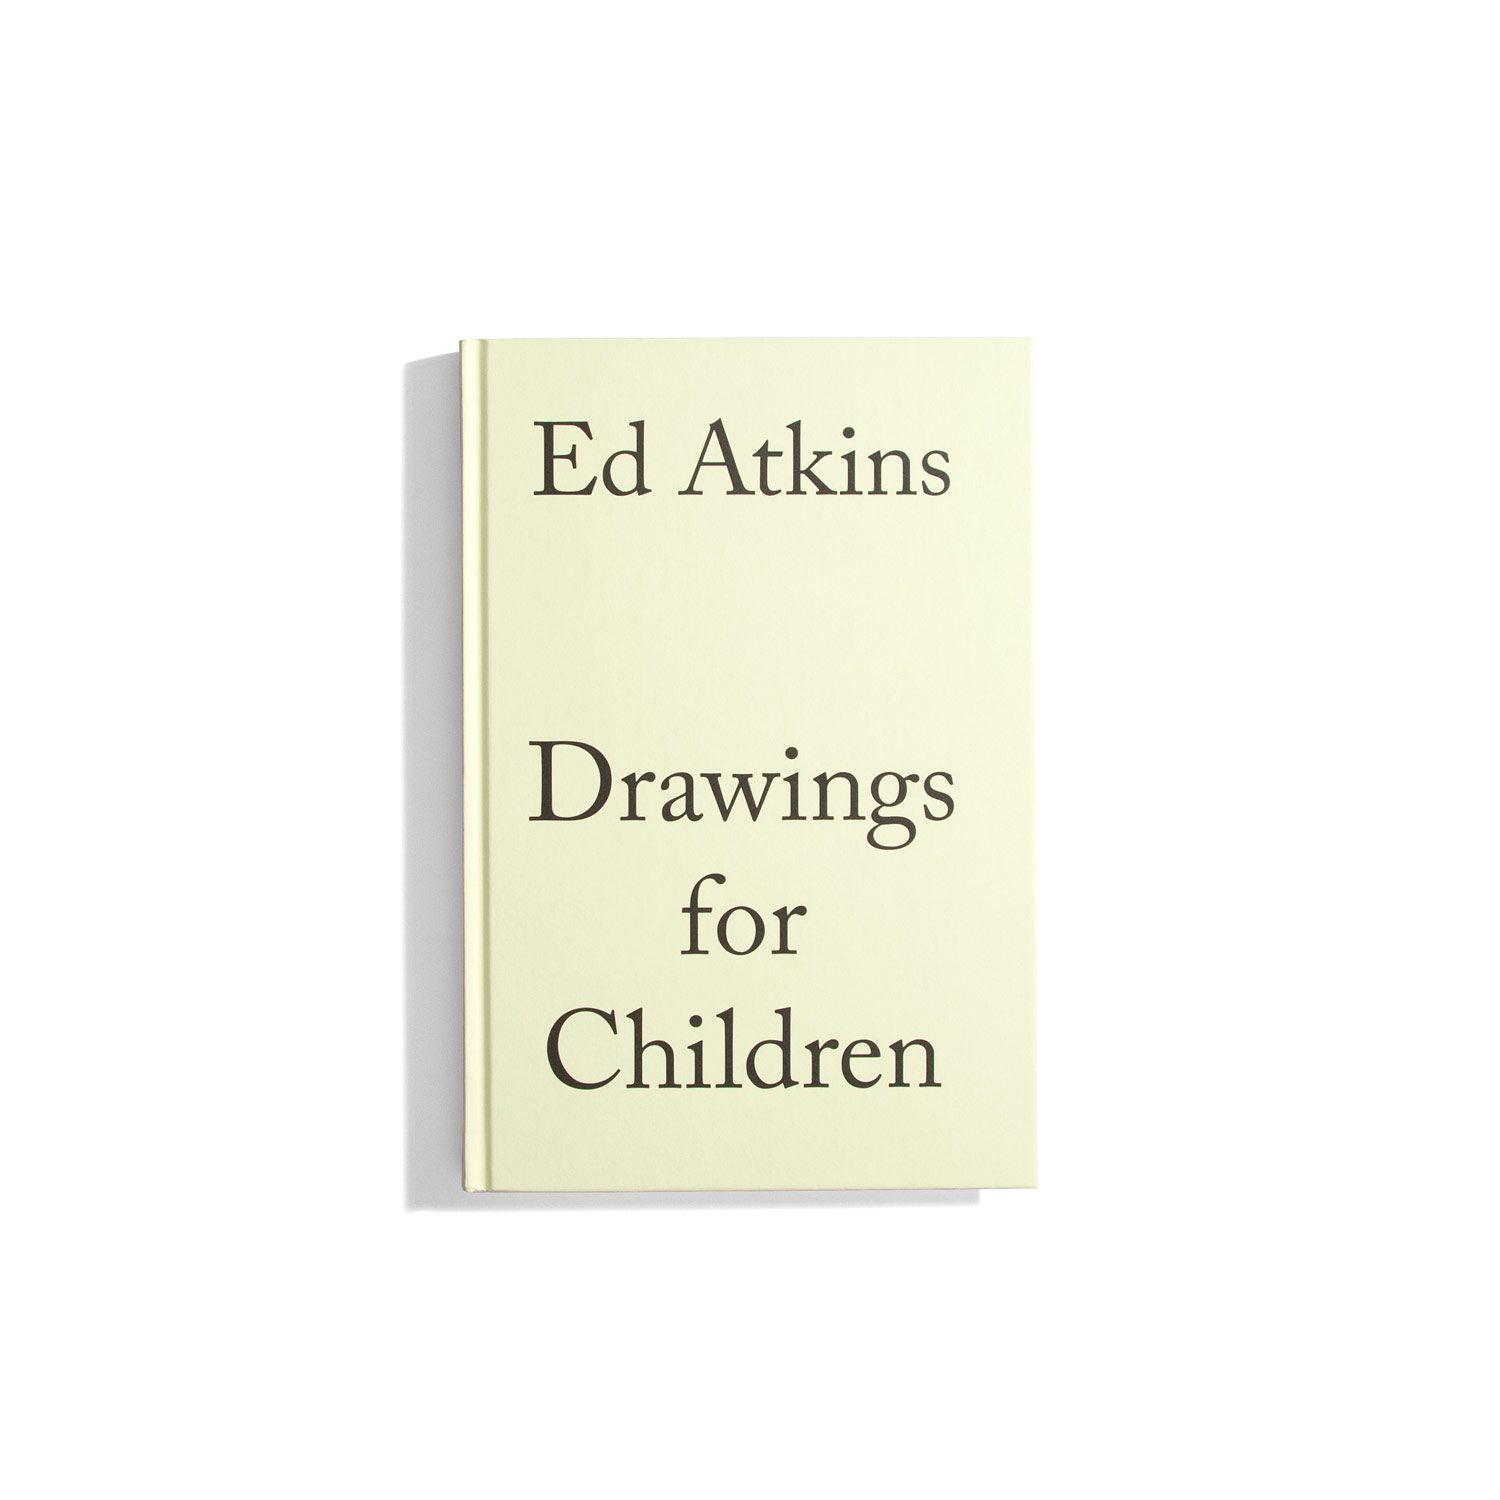 Drawings for Children - Ed Atkins